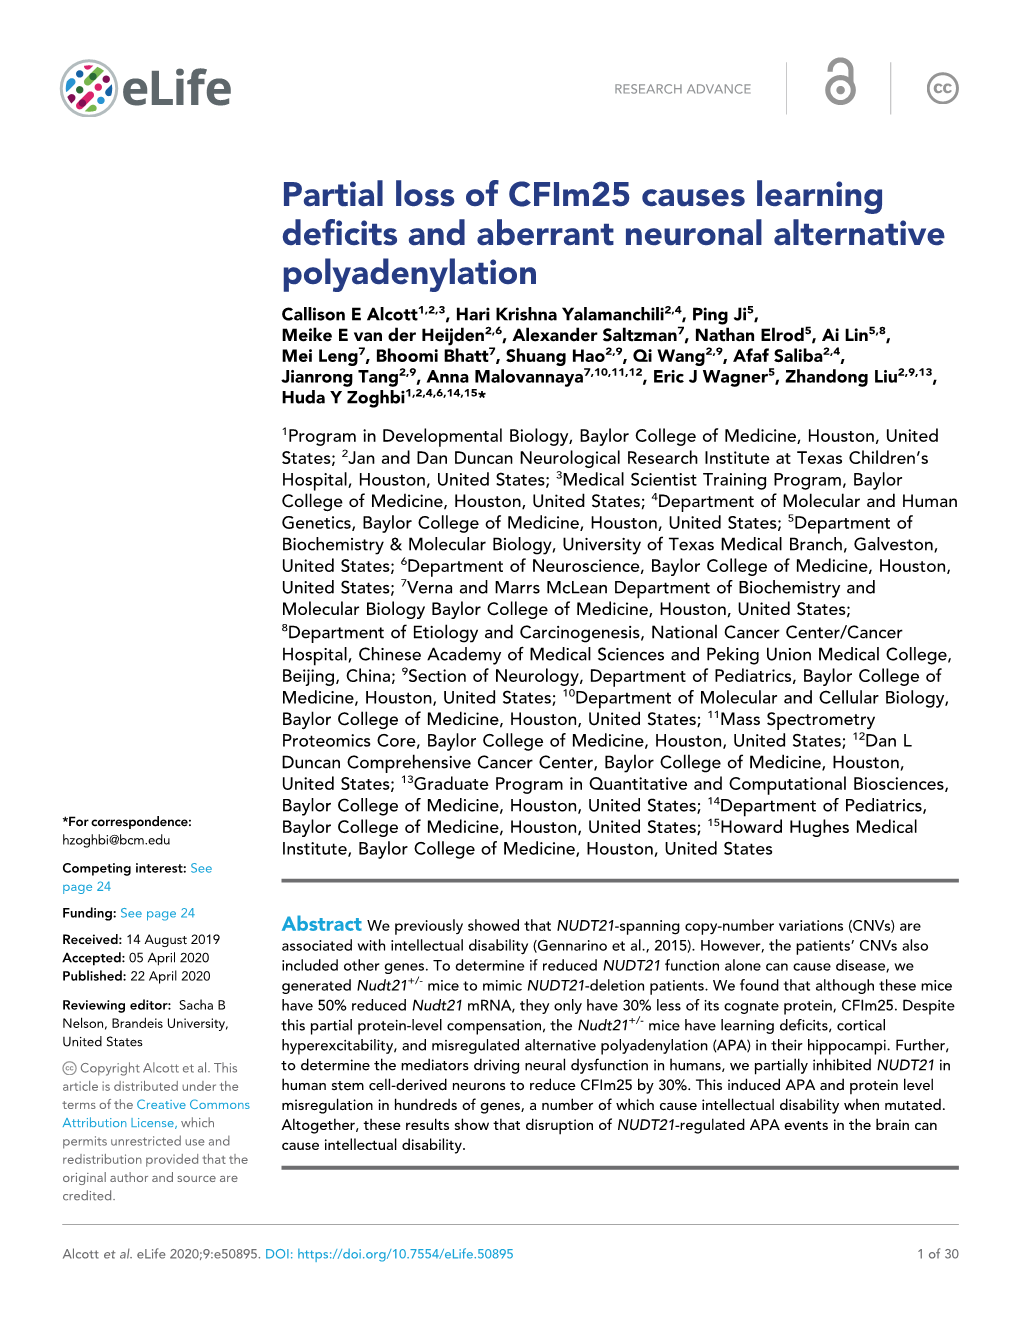 Partial Loss of Cfim25 Causes Learning Deficits and Aberrant Neuronal